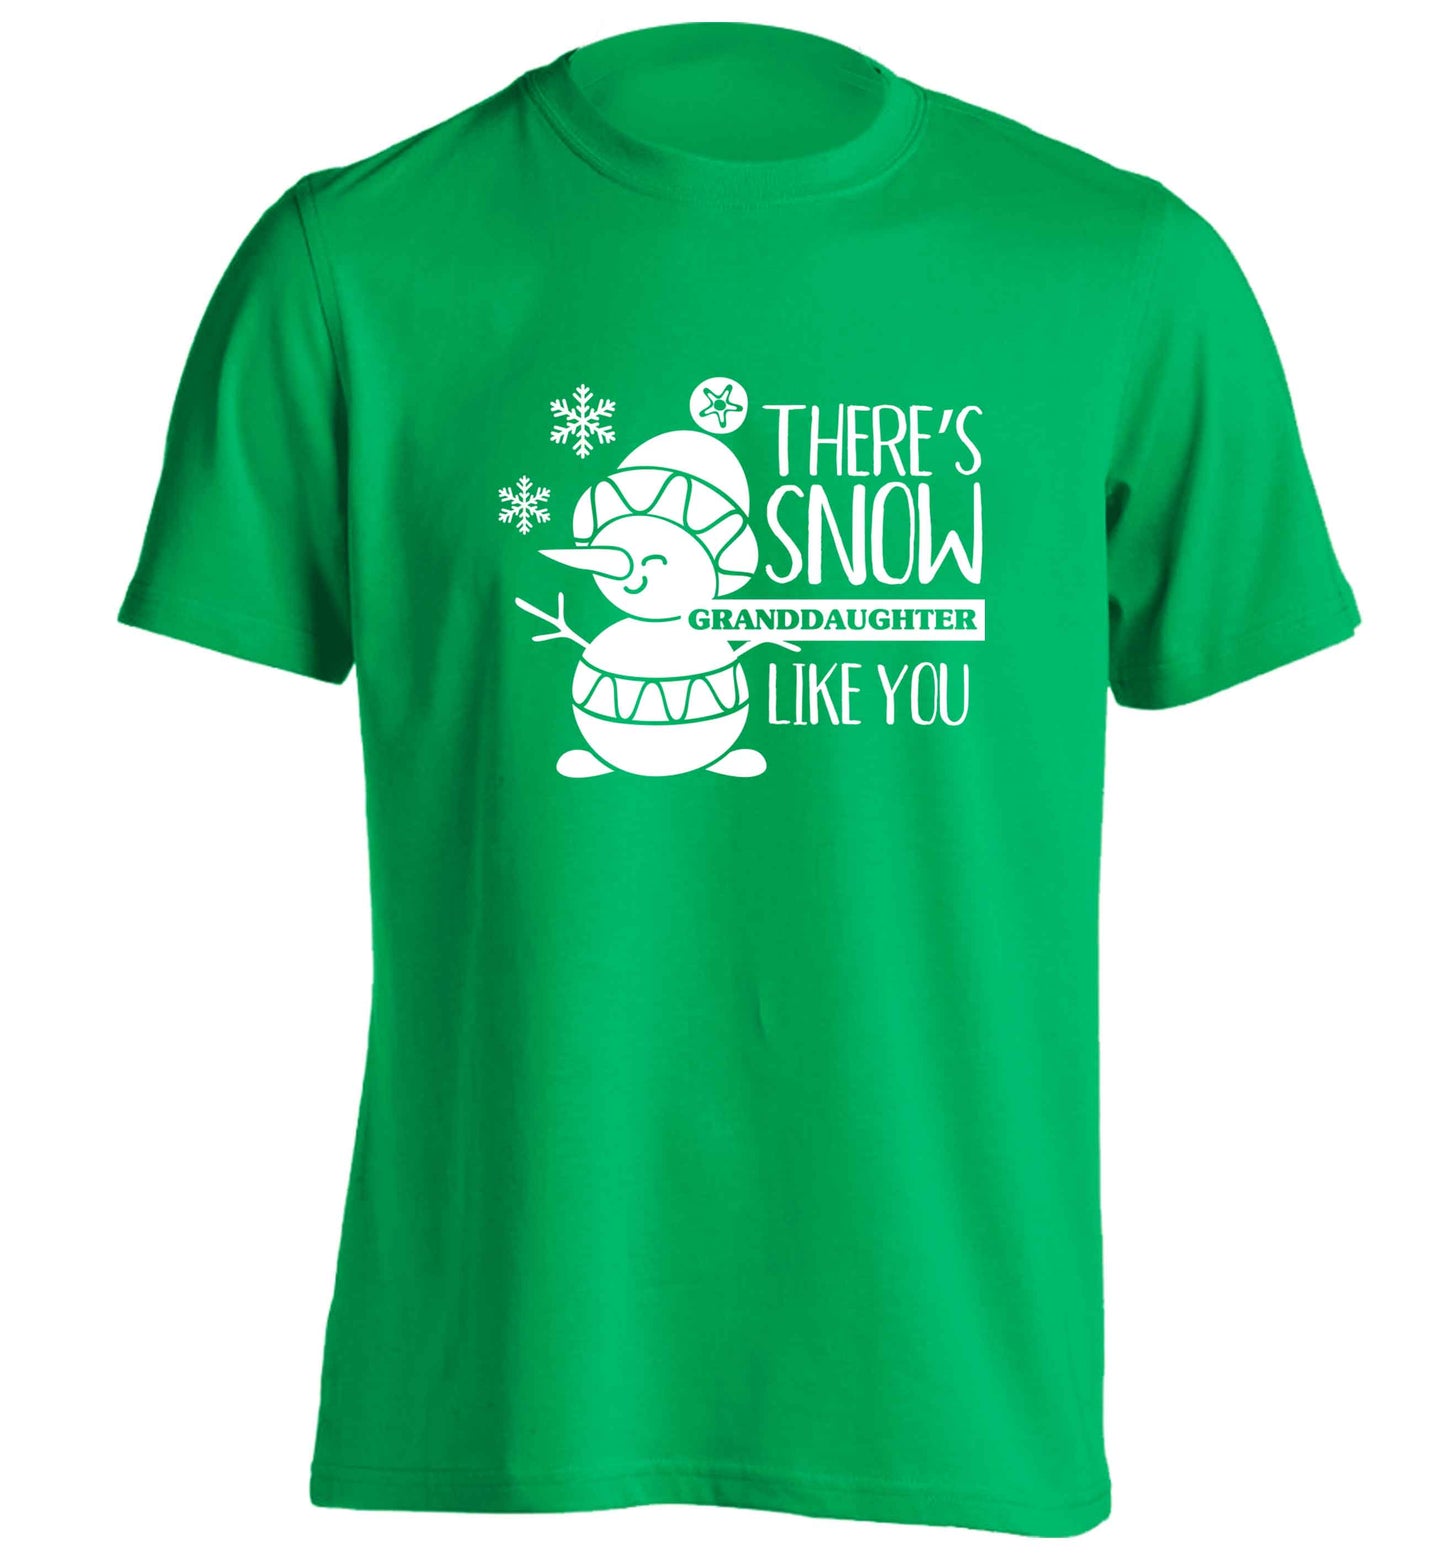 There's snow granddaughter like you adults unisex green Tshirt 2XL